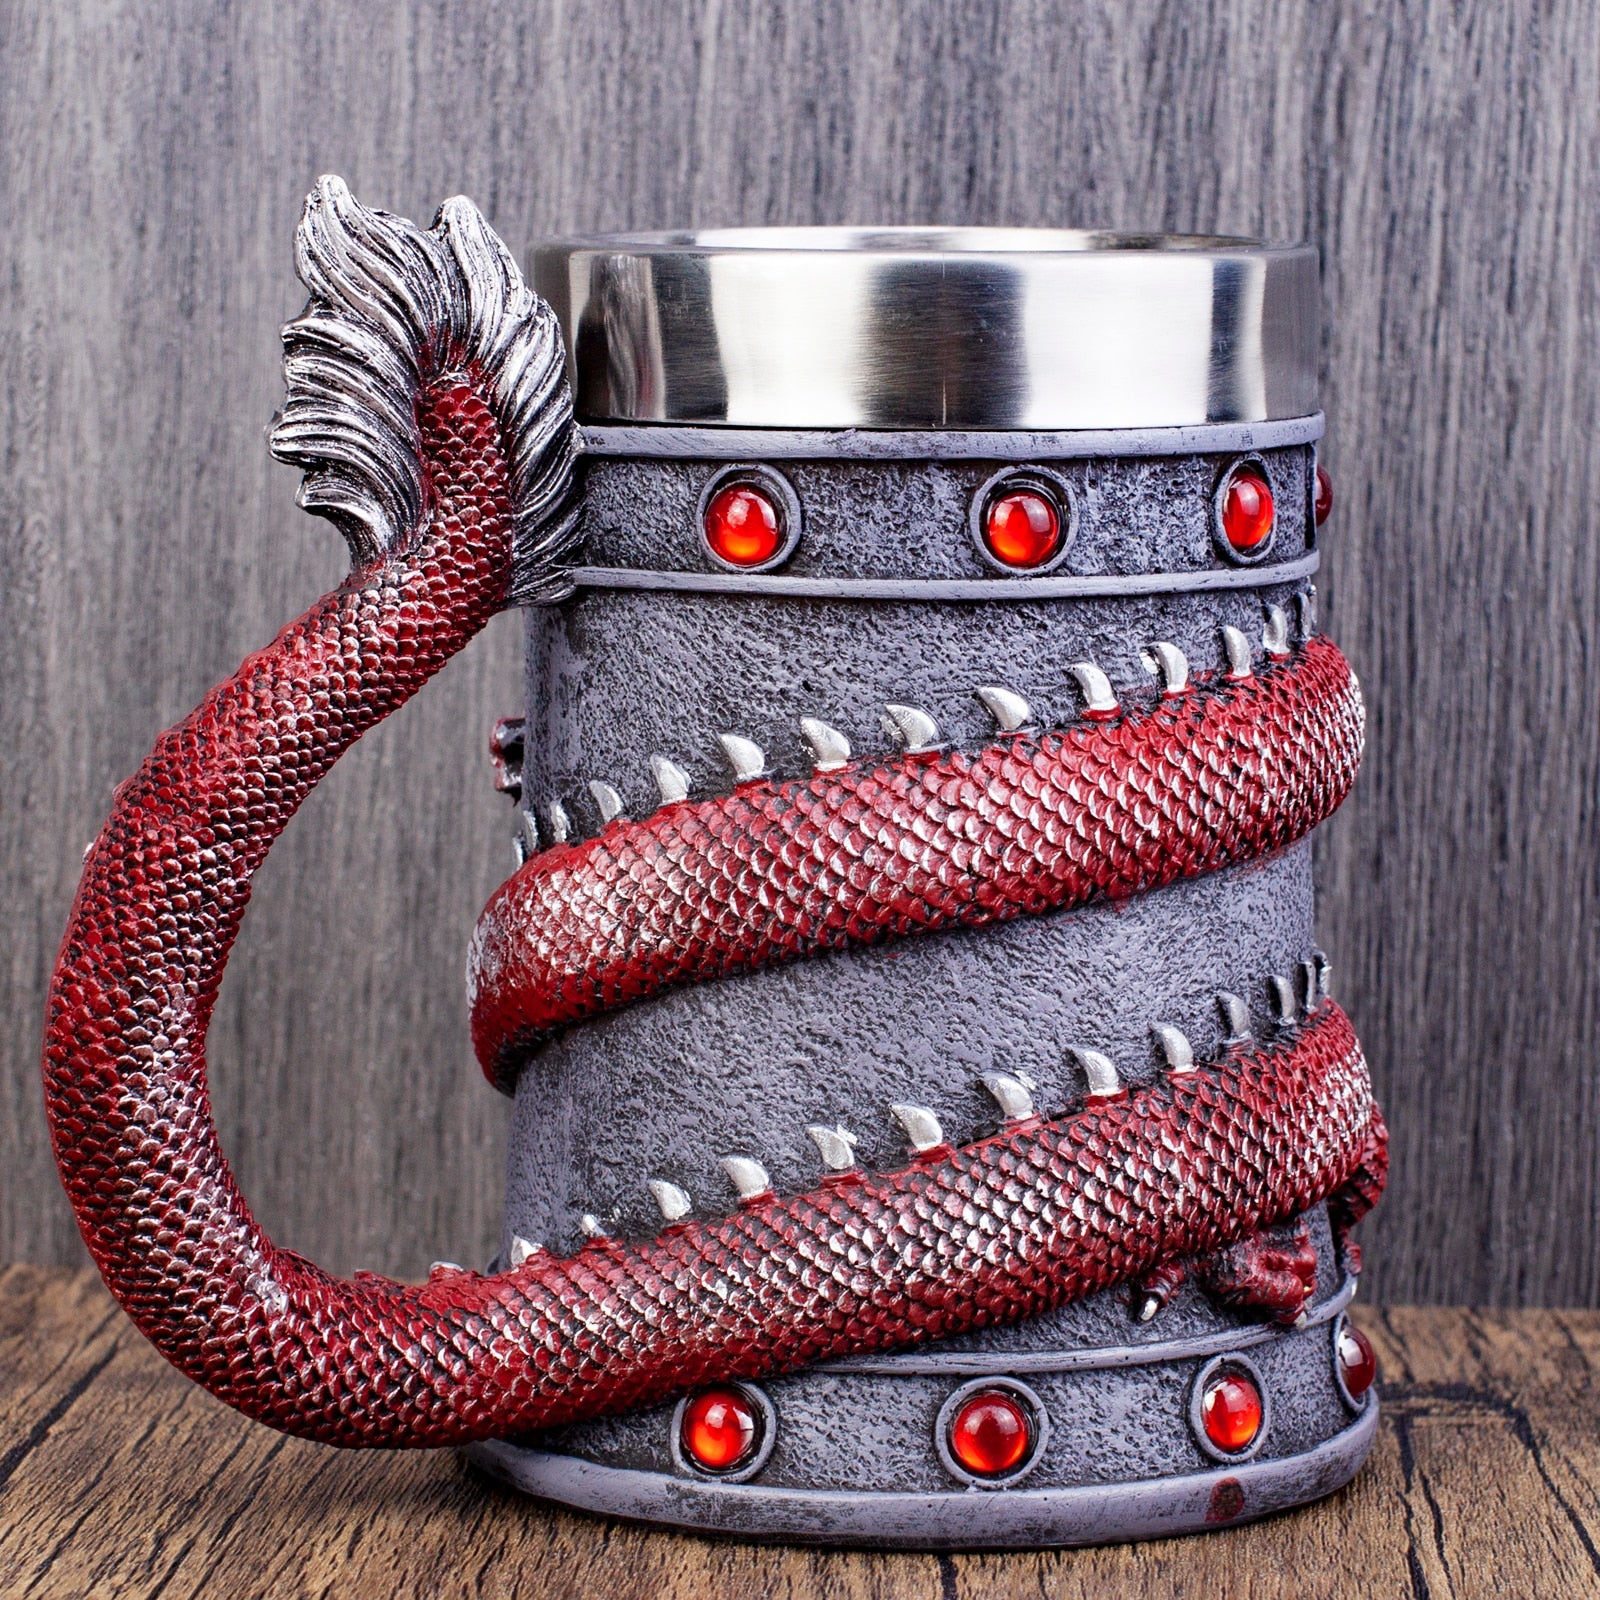 Detailed dragon tankard for collectors